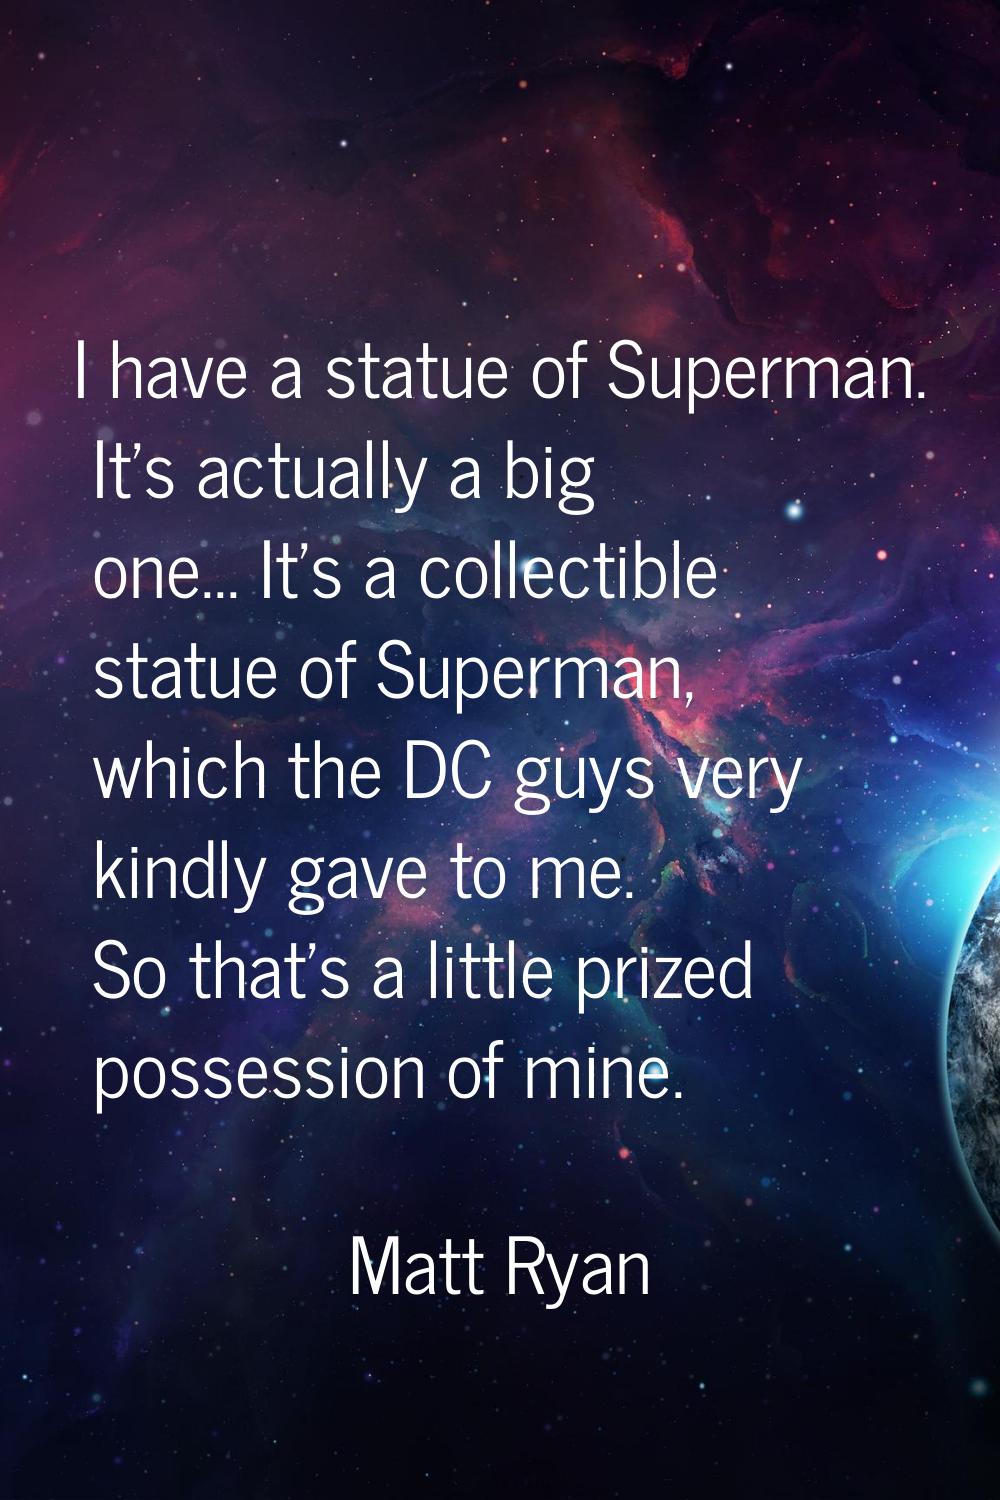 I have a statue of Superman. It's actually a big one... It's a collectible statue of Superman, whic